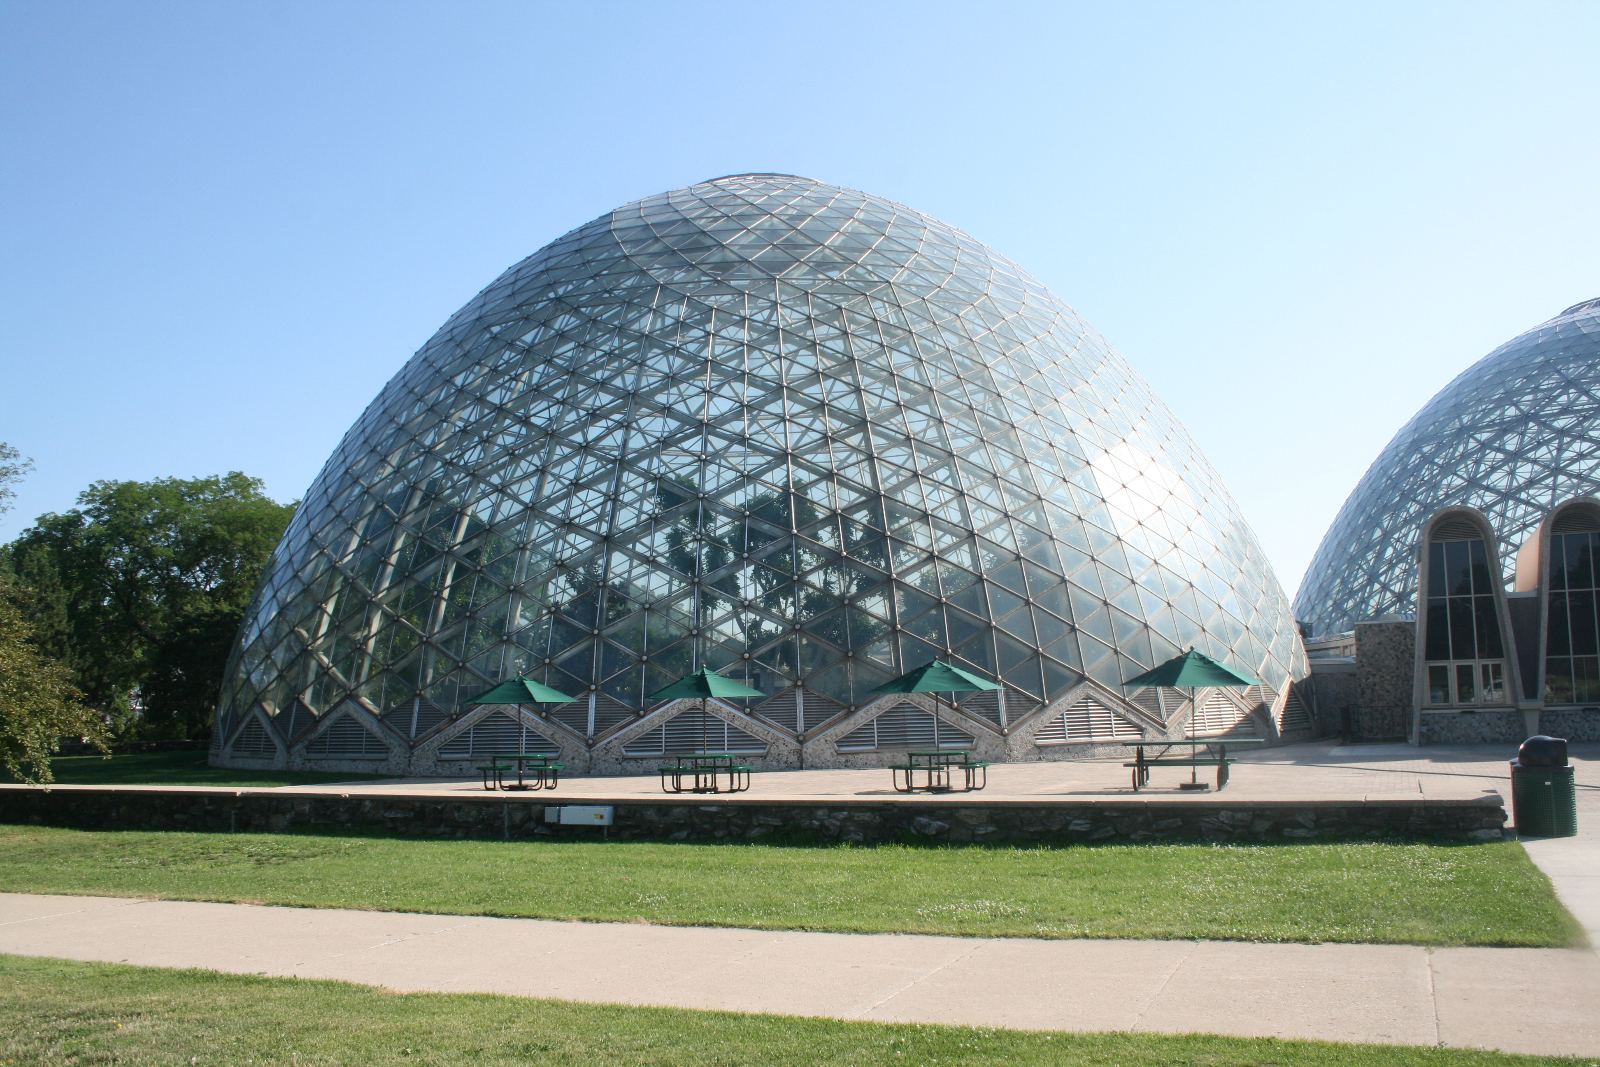 Mitchell Park Horticultural Conservatory, The Domes, are just across a bridge from Three Bridges Park. 